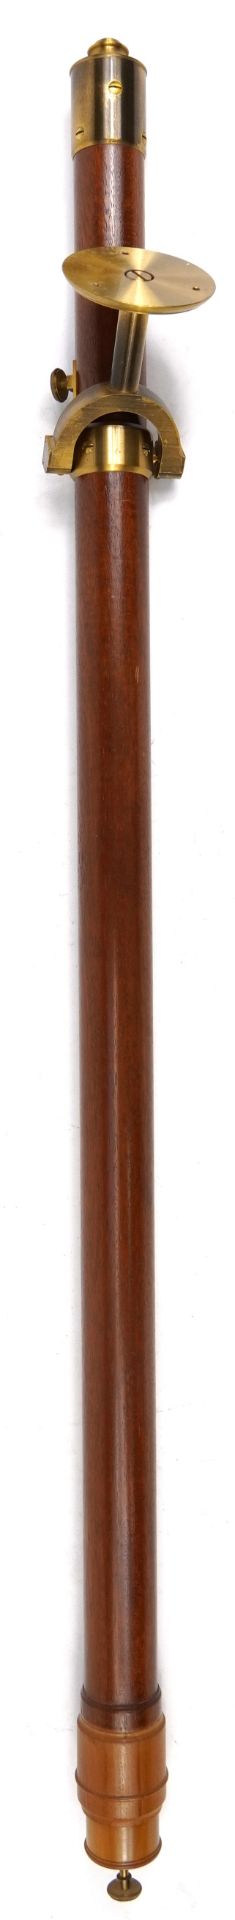 Mahogany and brass ship's stick barometer by Culpeper Instruments numbered 059/82, 96.5cm in length - Image 3 of 3